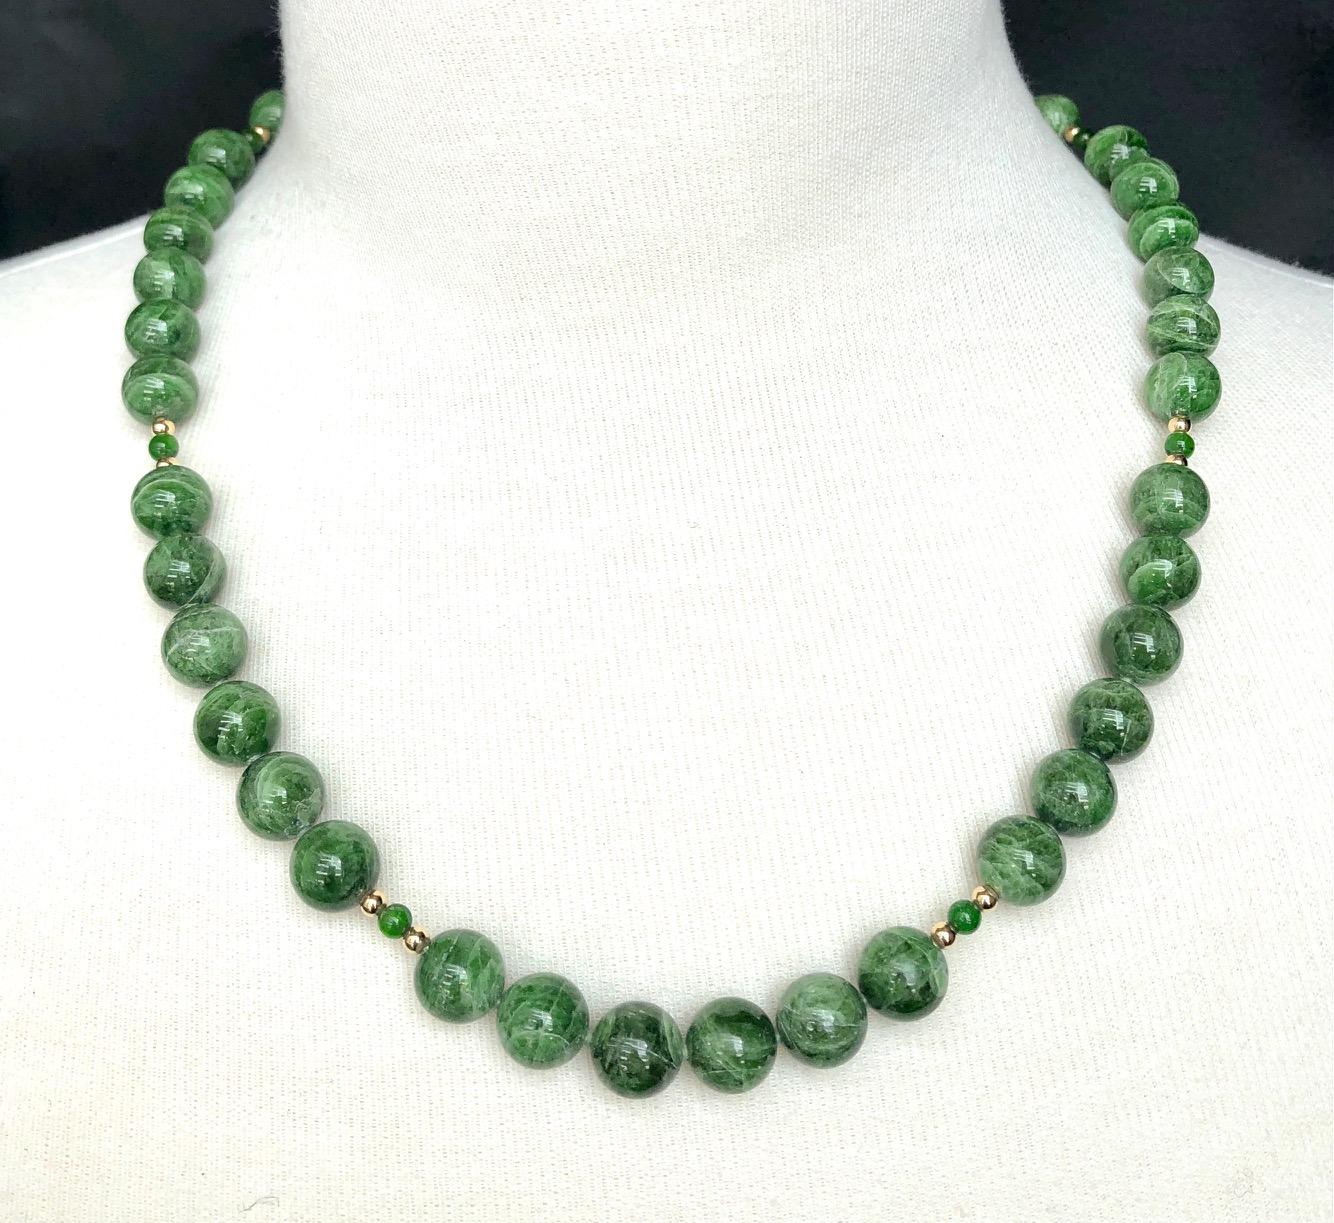 Every woman should have a strand of pearls, but not every woman (or man) has the opportunity to own a strand of rare, chrome diopside beads! This beautiful strand of 10 mm round, variegated chrome diopside beads displays gorgeous shades of basil,